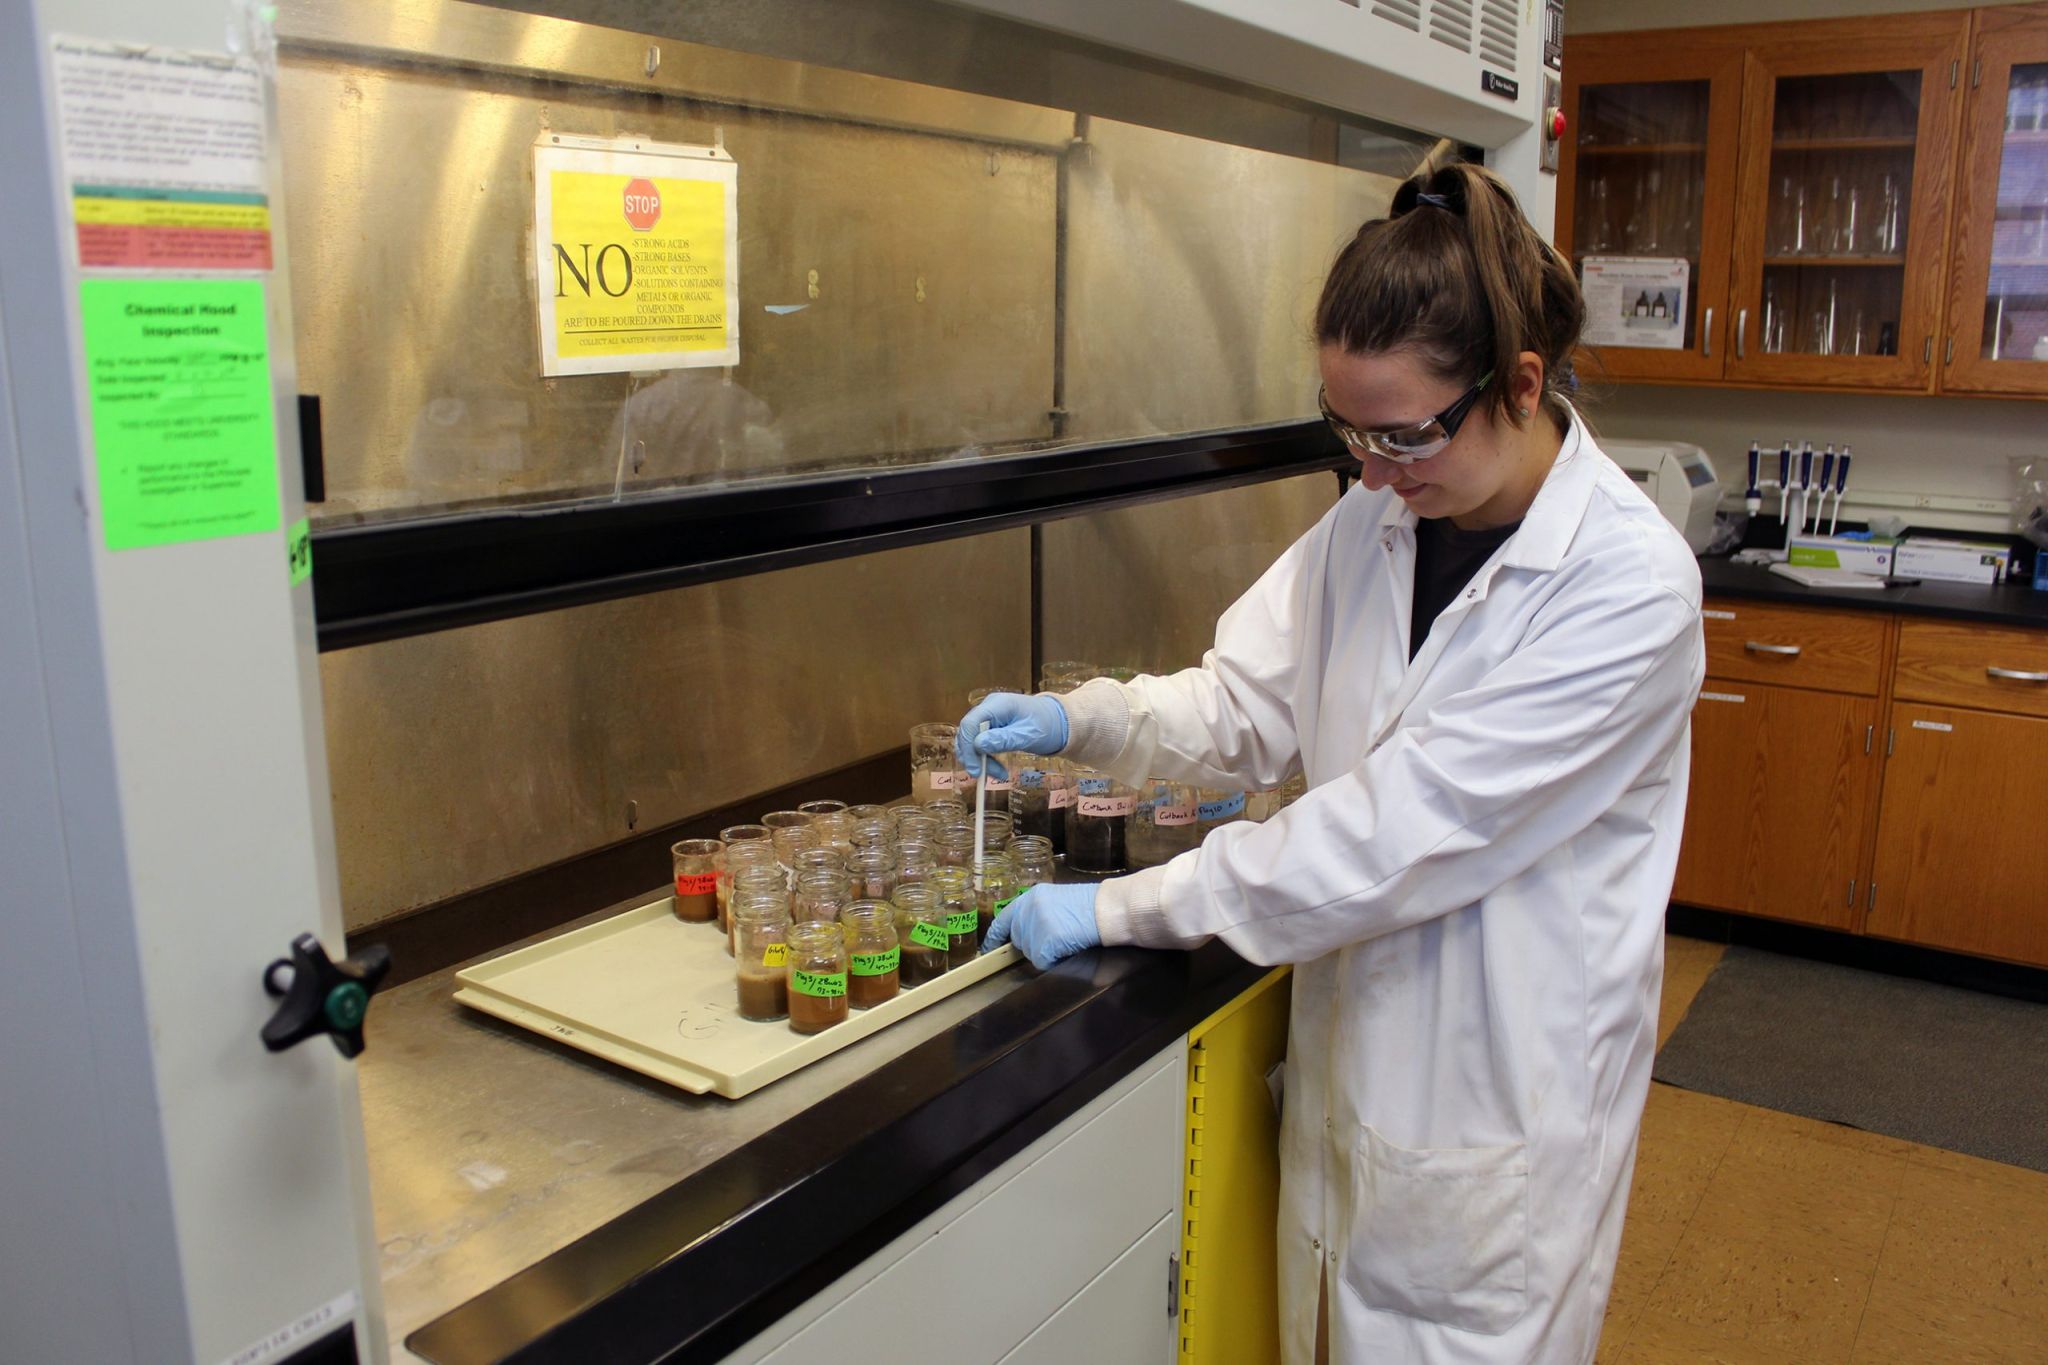 Graduate students measures soil samples in a lab